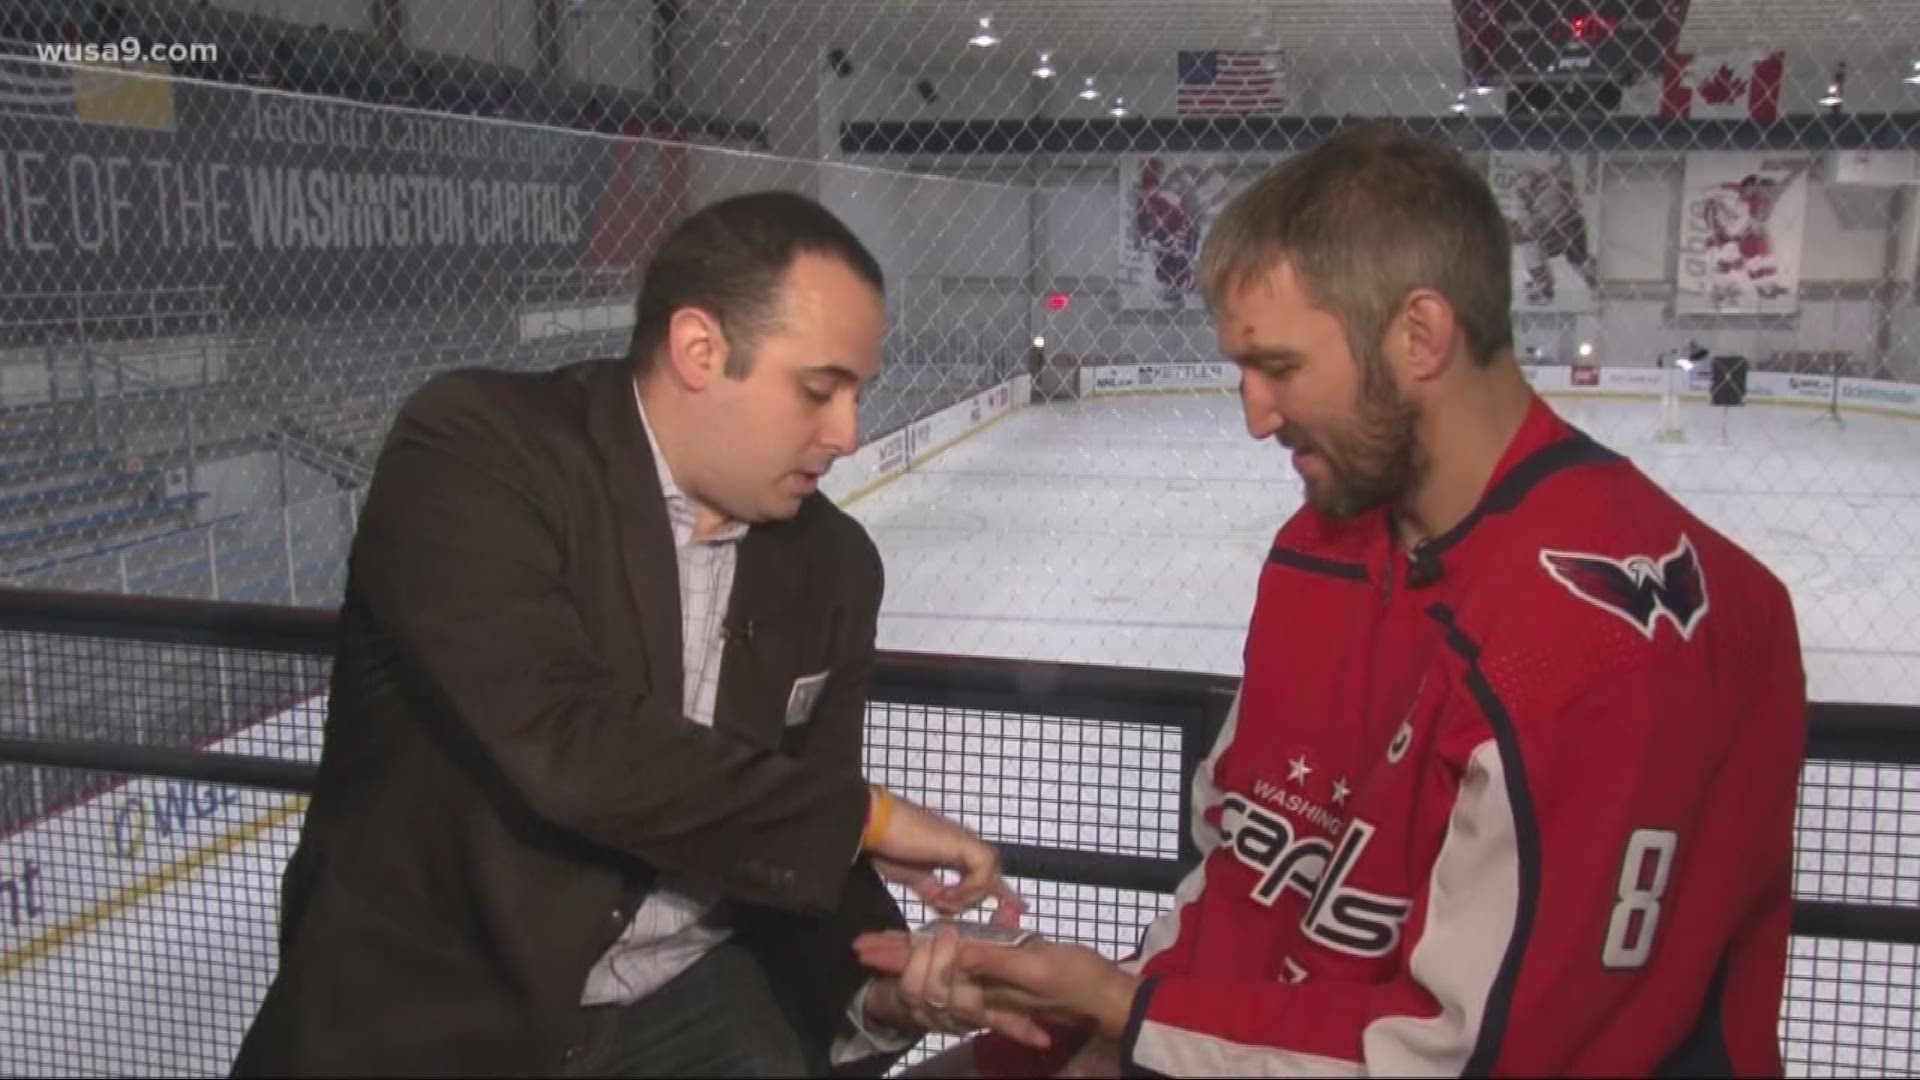 Our production assistant Vicente Davila baffled Capitals Captain Alex Ovechkin with a magic trick.